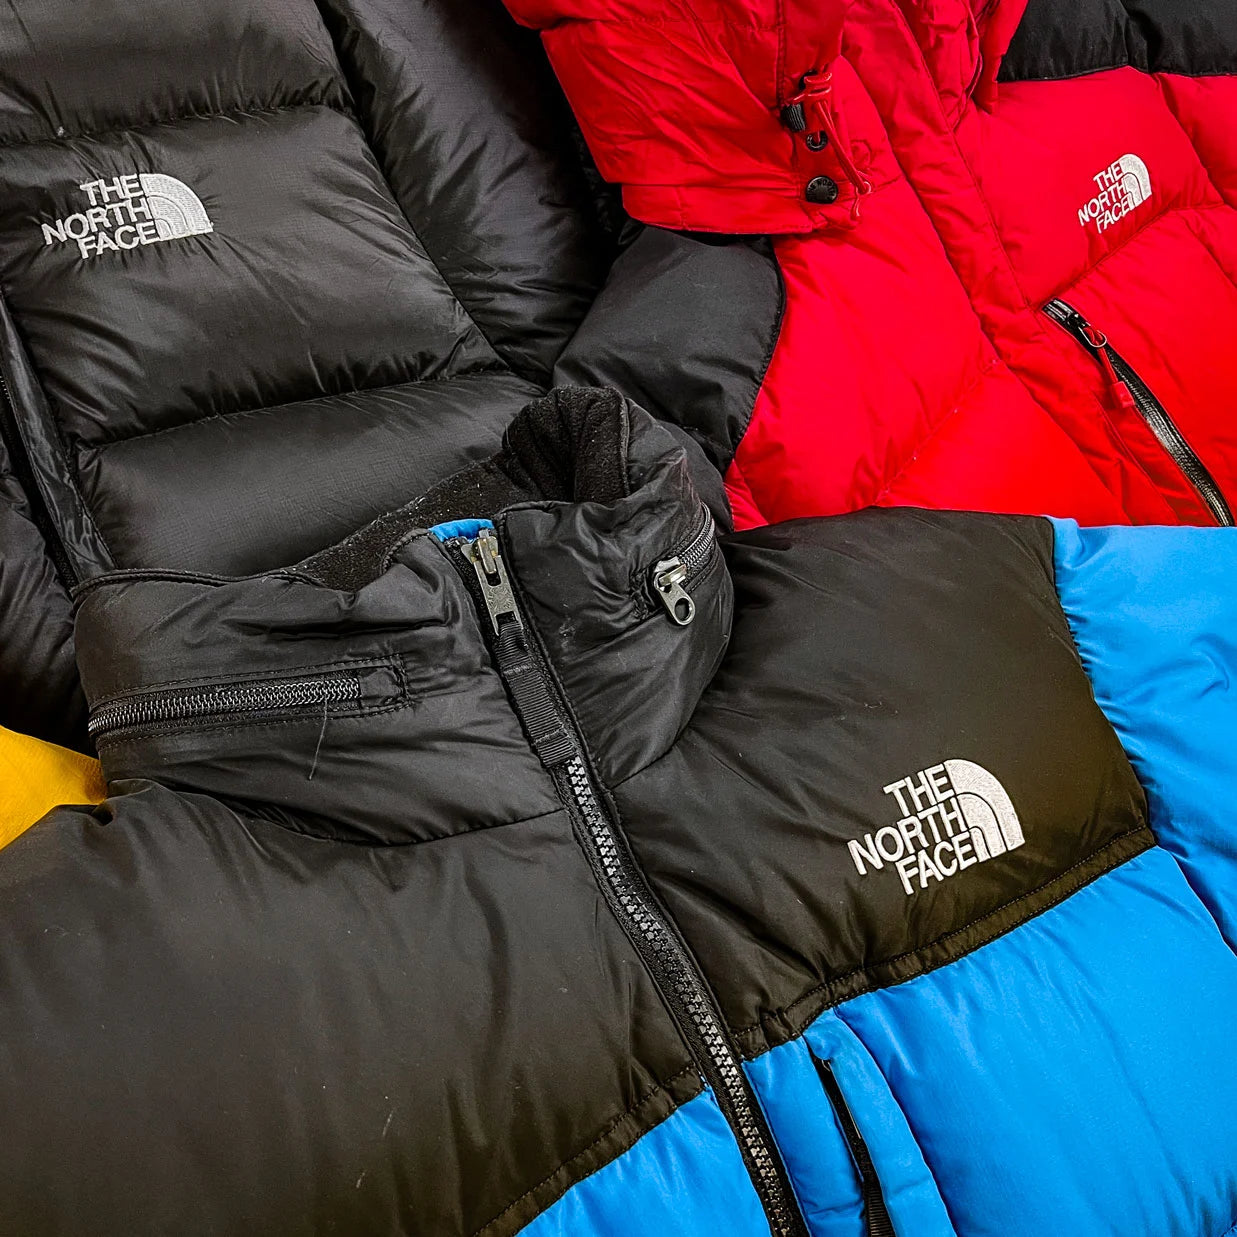 The North Face  Shop The North Face coats, jackets and